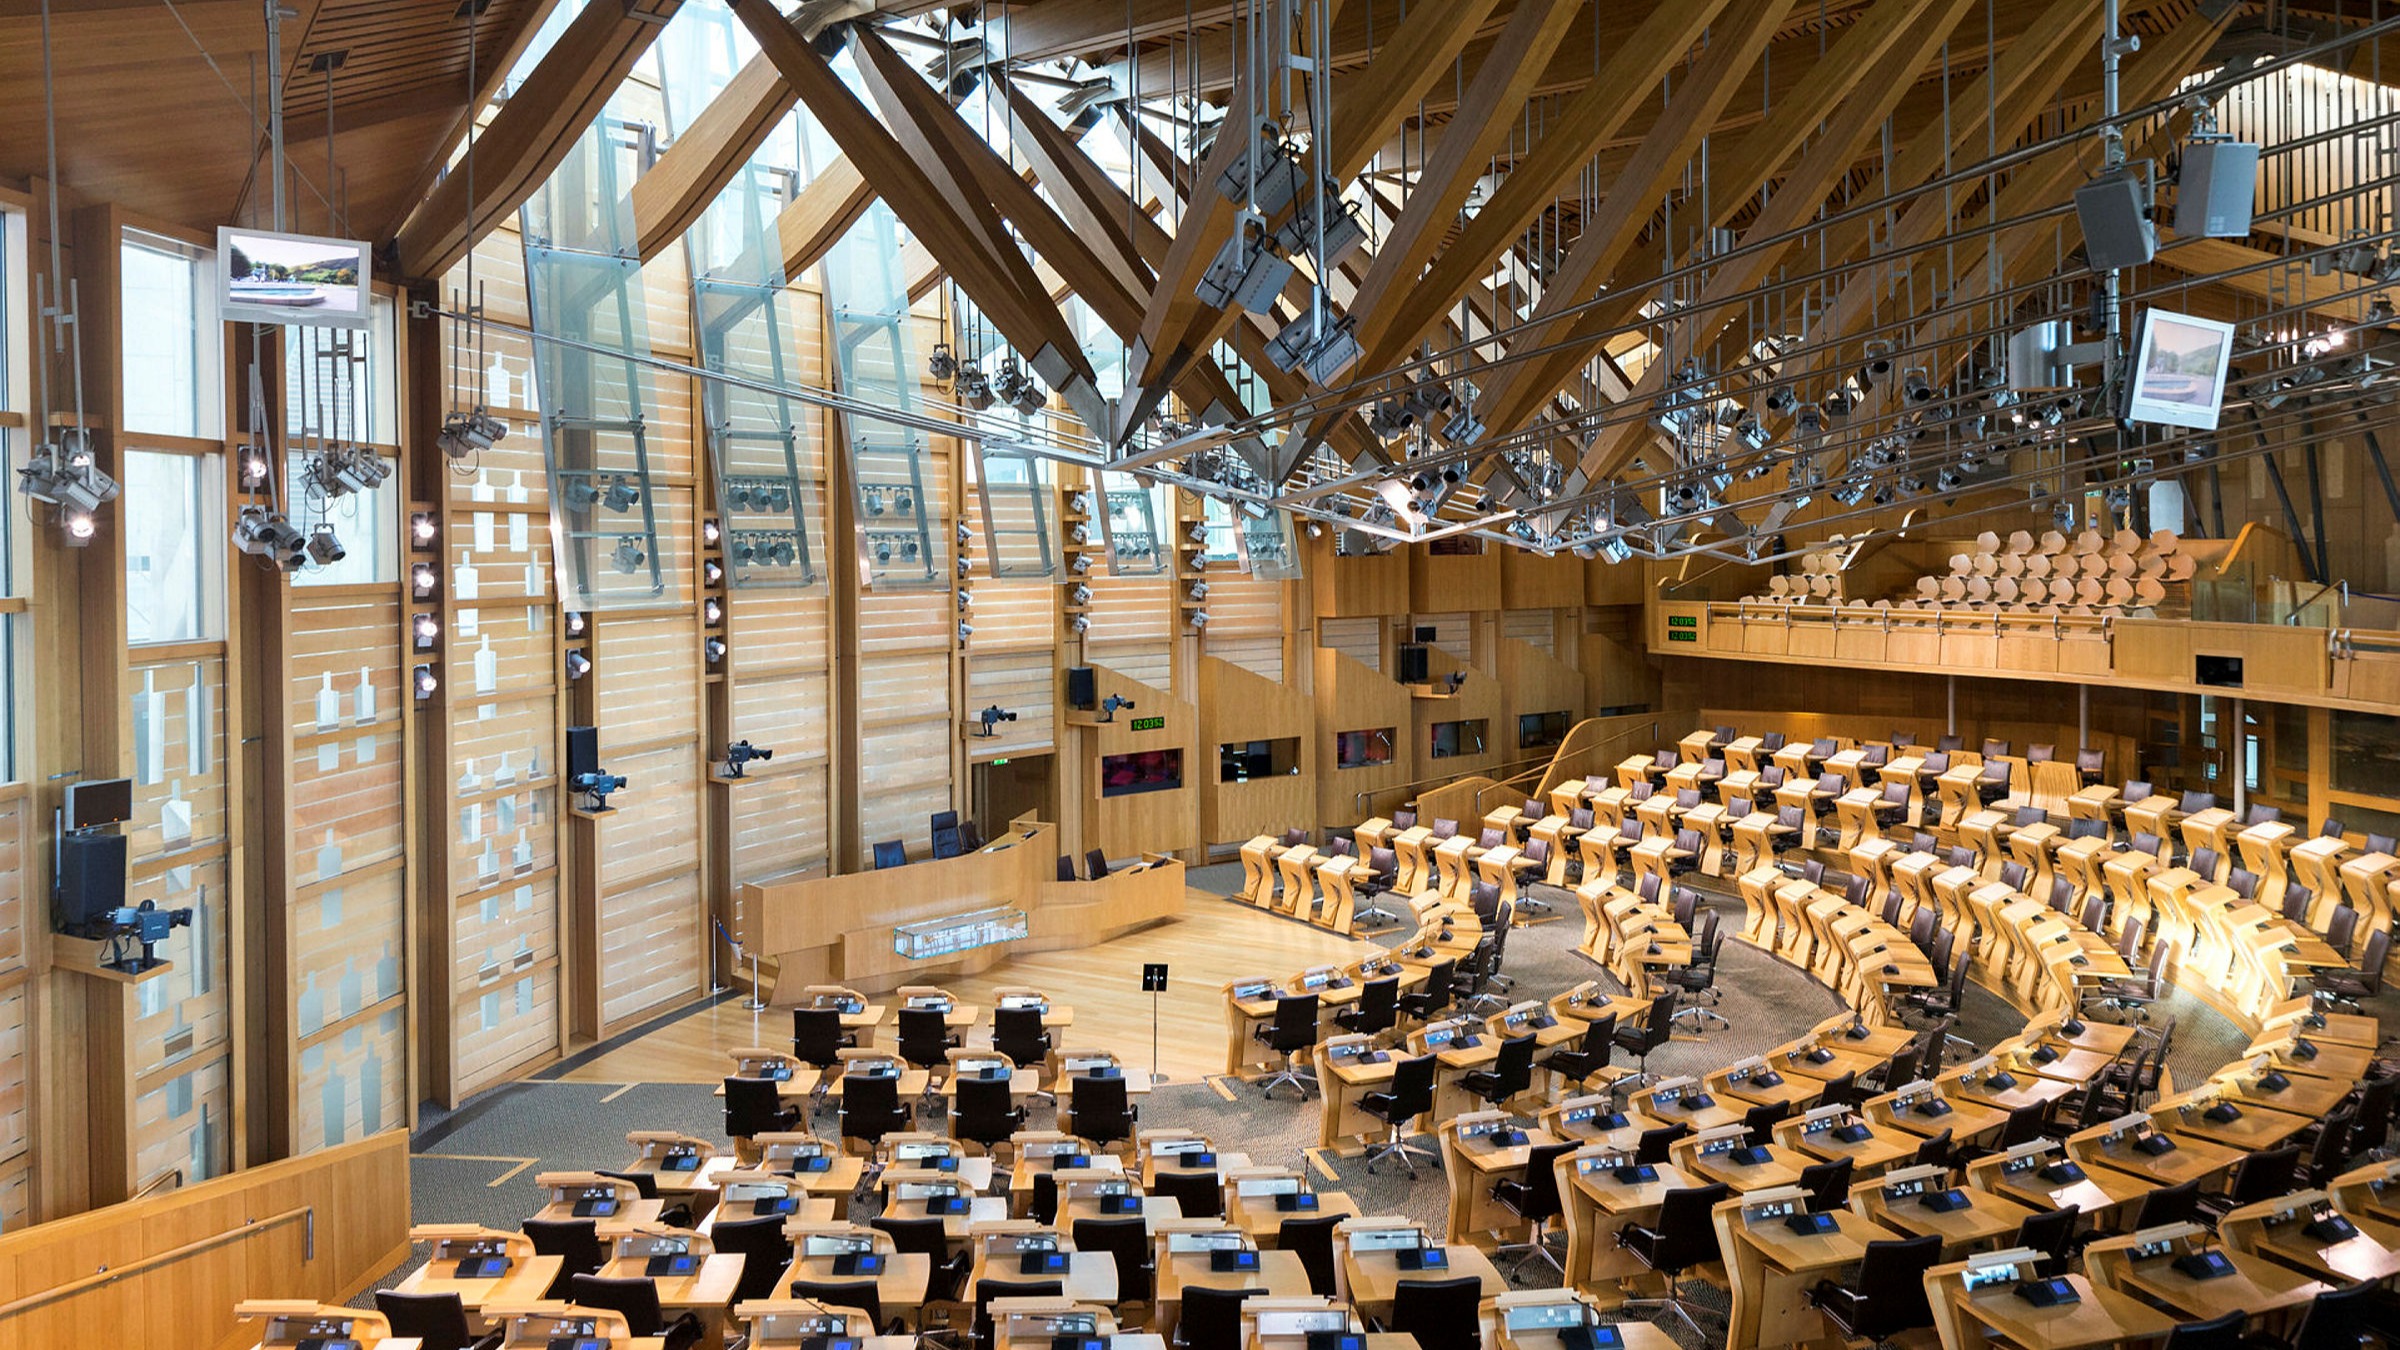 Boris Johnson proposes shift of Scottish powers from Edinburgh to councils  | Financial Times